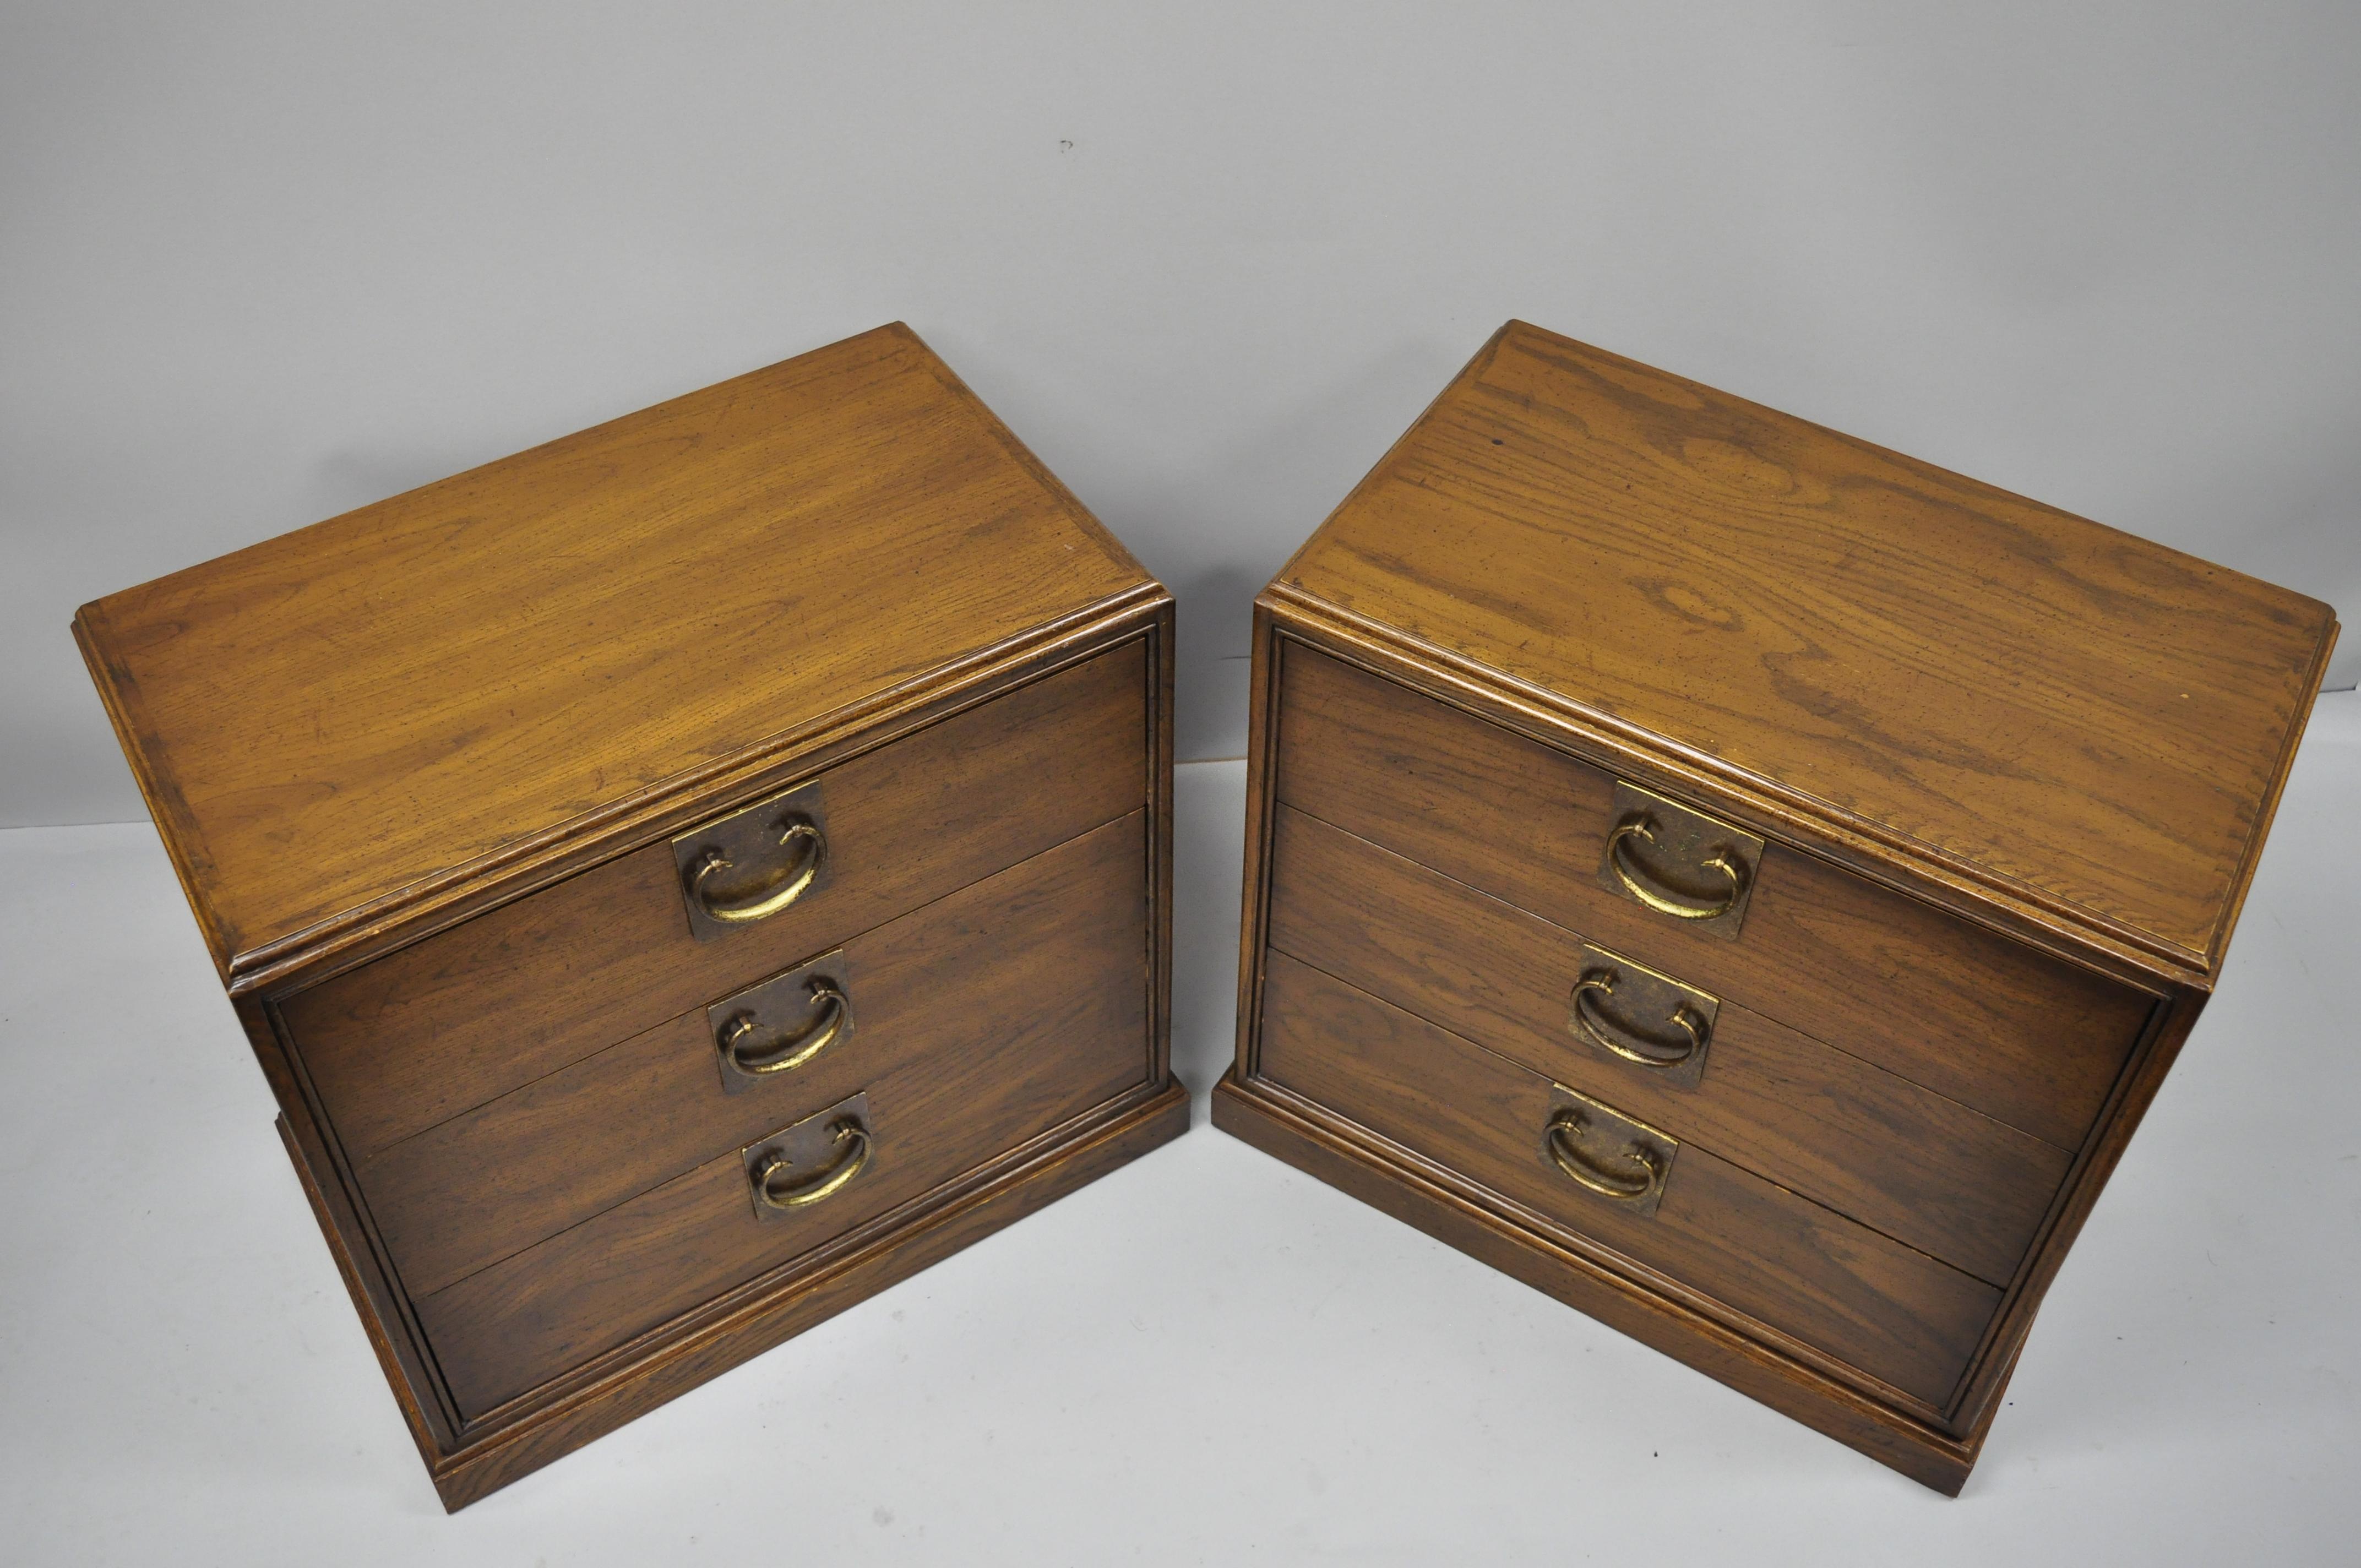 Pair of John Stuart chinoiserie James Mont style oak nightstand bedside chests. Items feature solid wood construction, beautiful wood grain, original label, 3 drawers, solid brass hardware, clean modernist lines, circa 1960. Measurements: 25